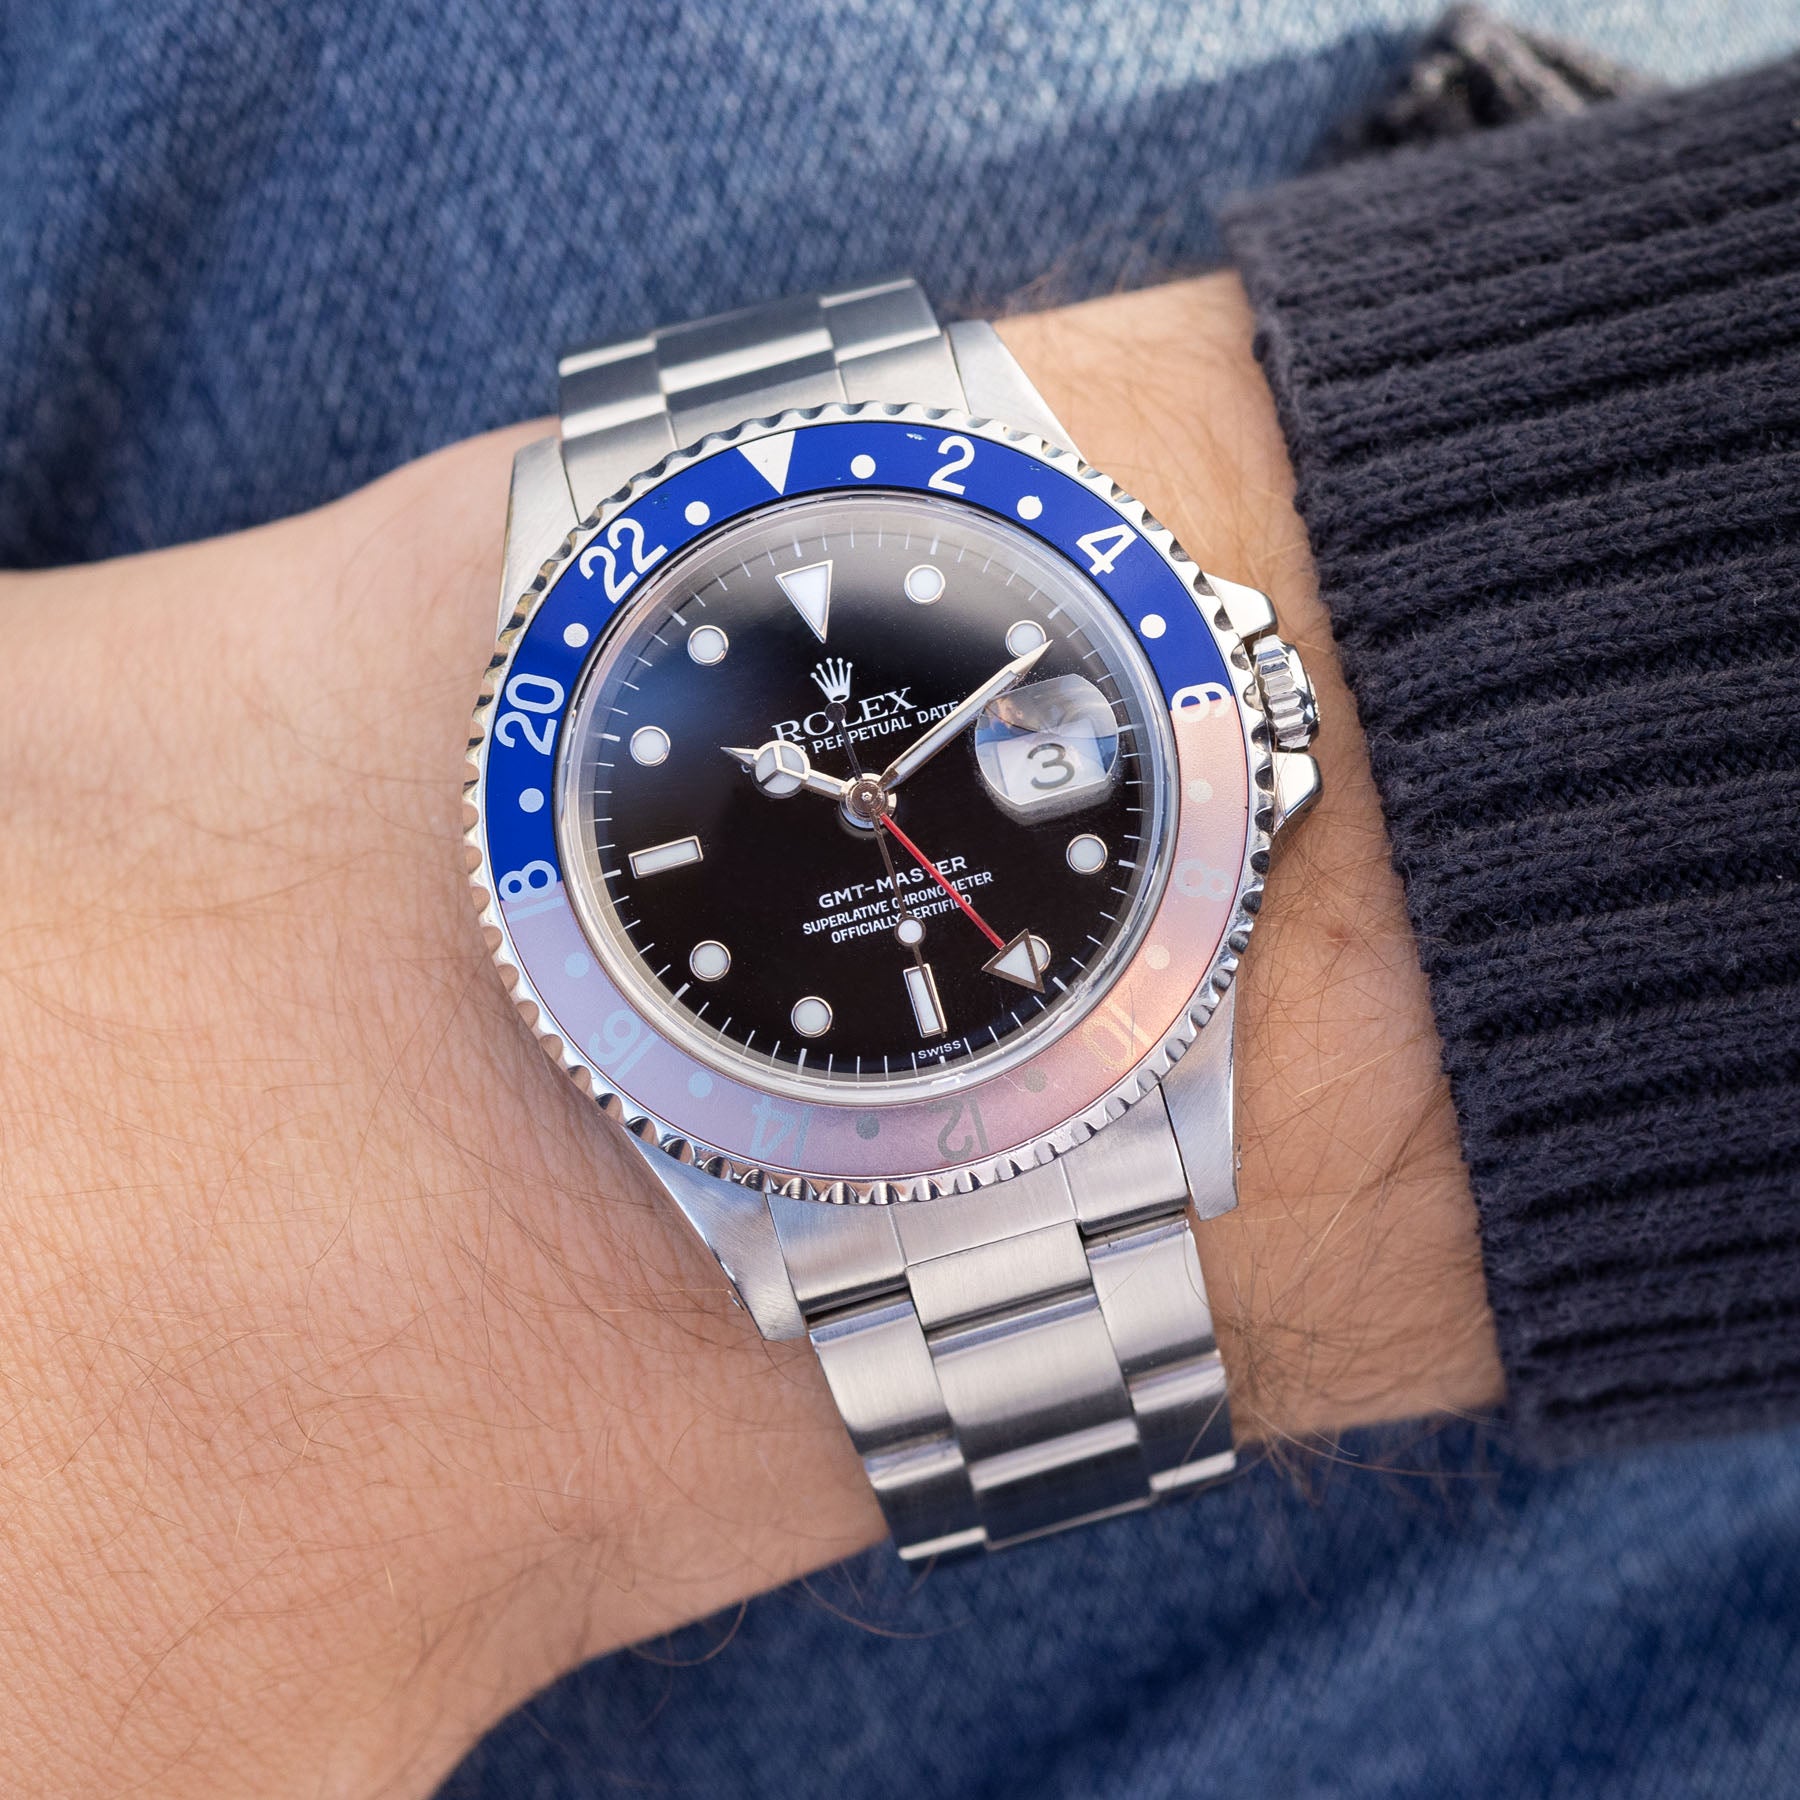 at lege i morgen Åre Rolex GMT-Master 16700 Faded Pepsi Bezel Swiss Only Dial